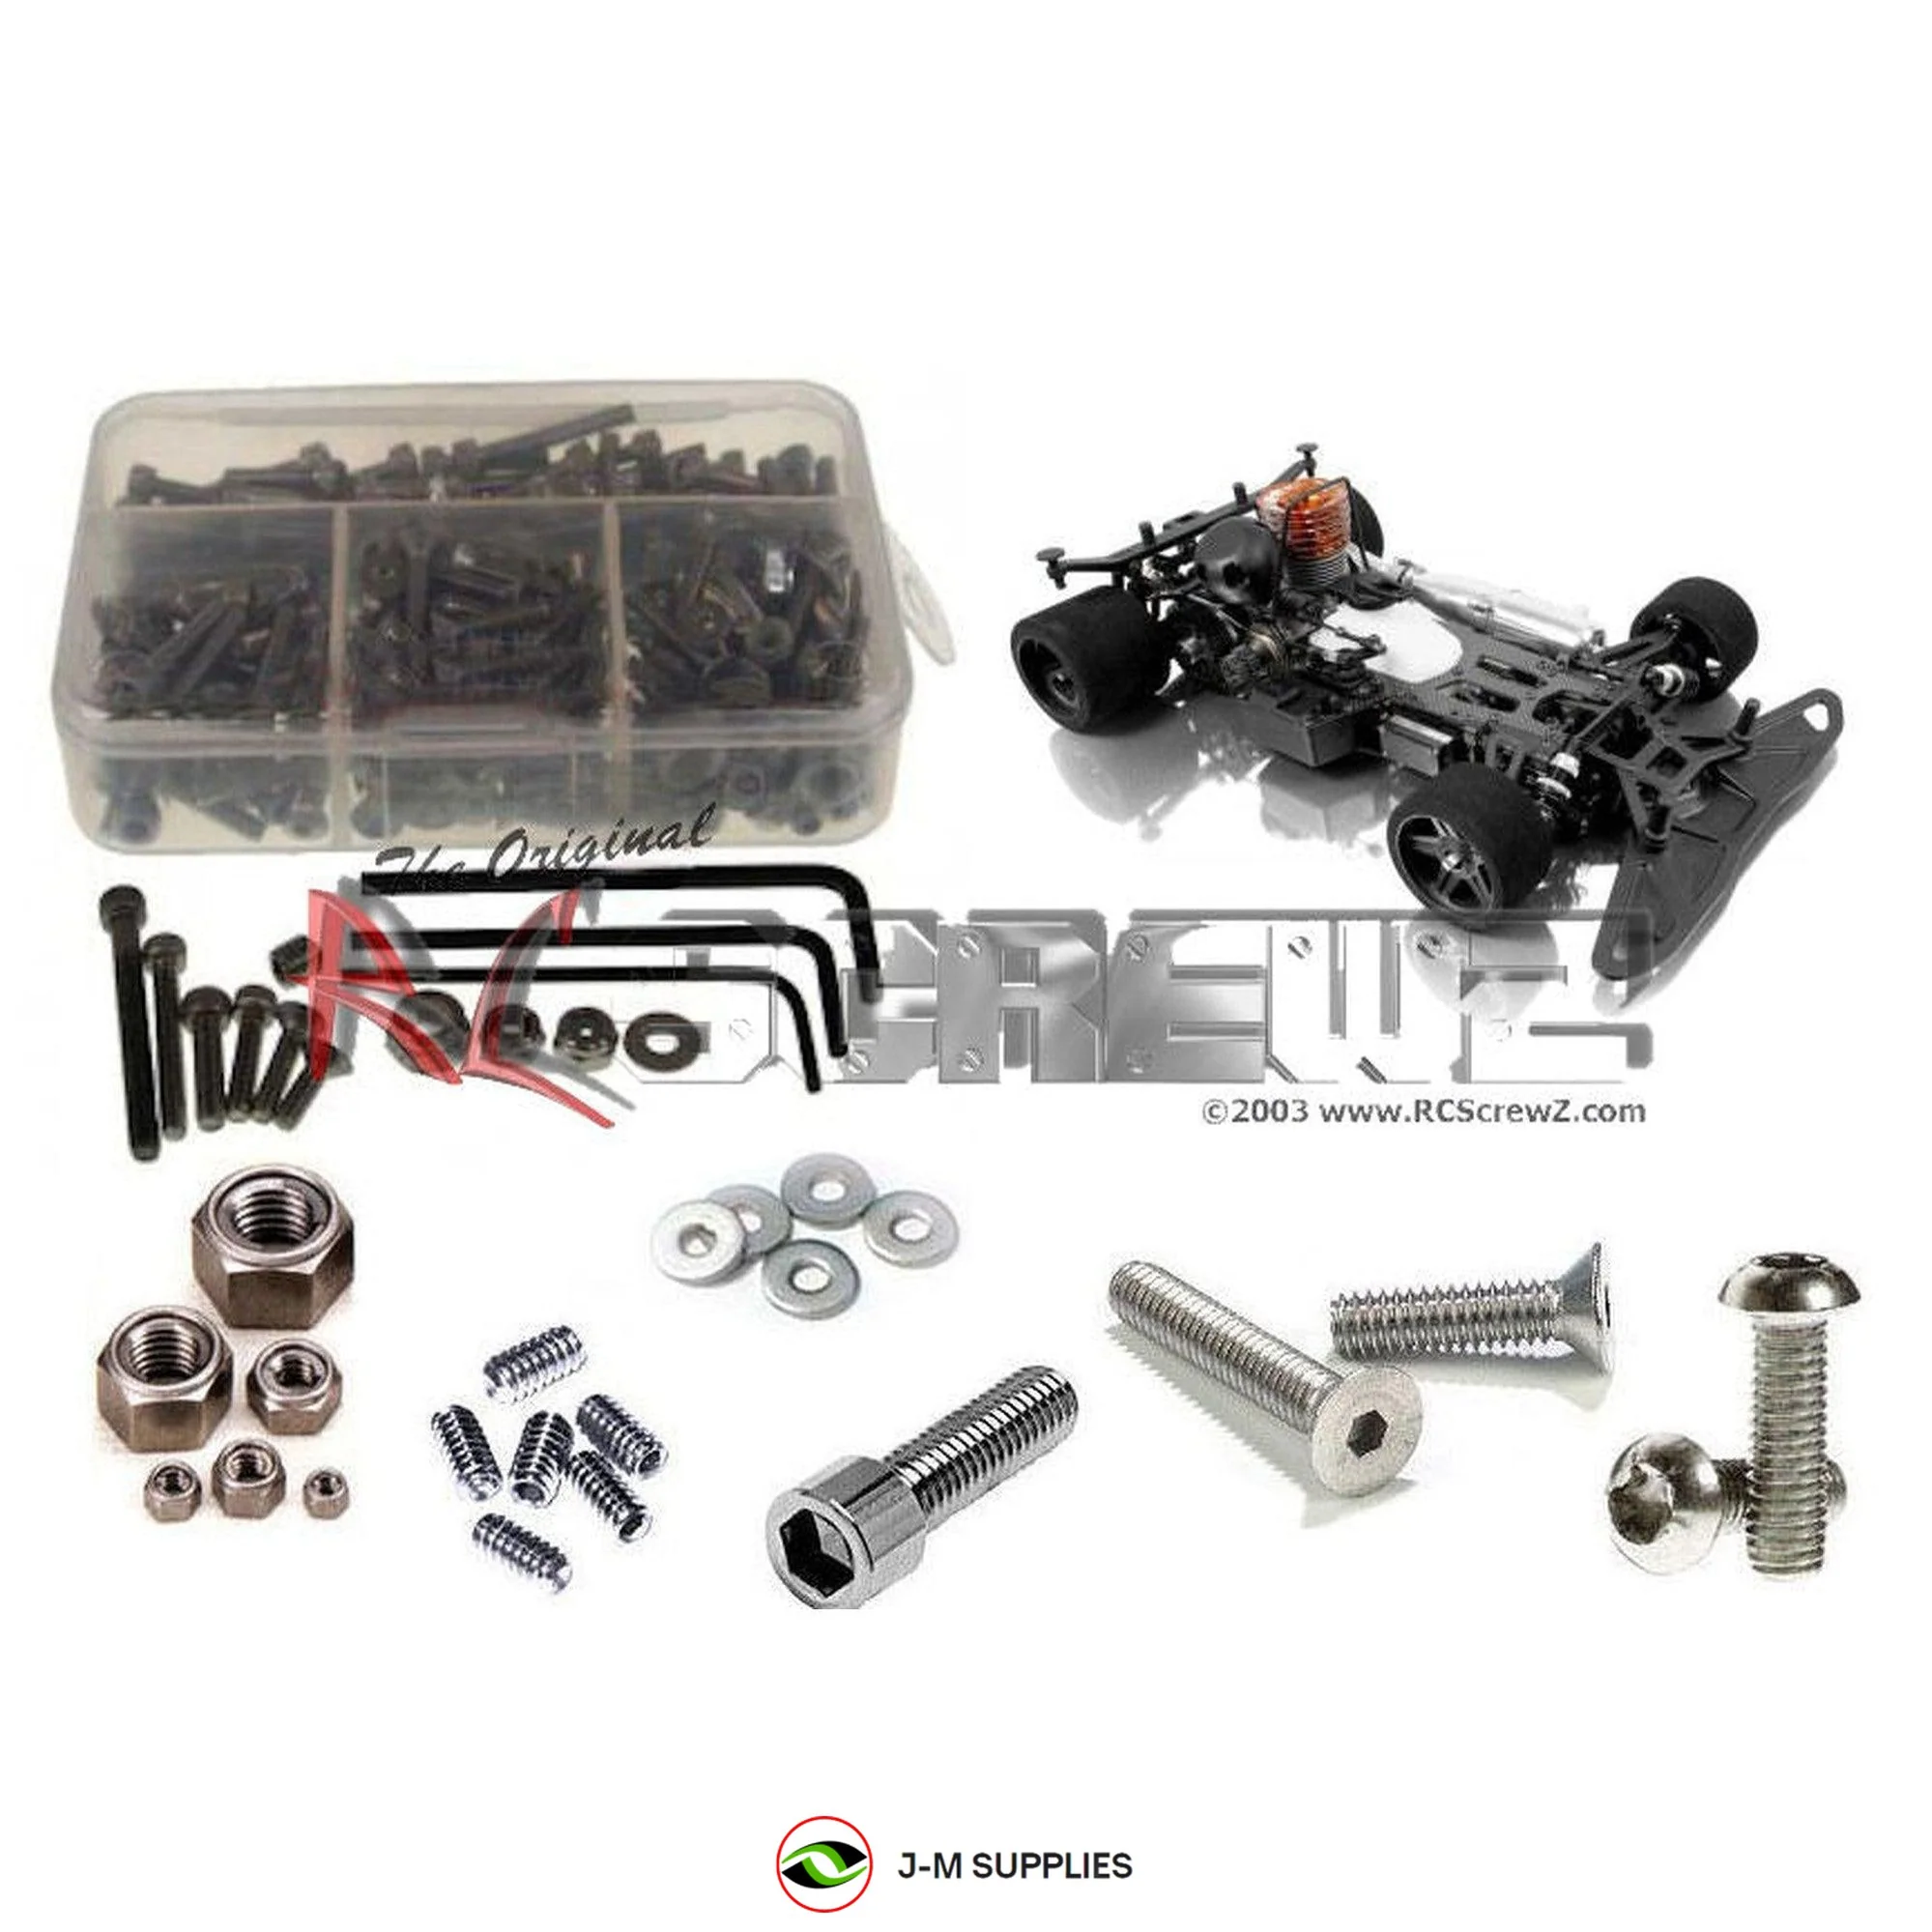 RCScrewZ Stainless Steel Screw Kit xra035 for Team XRAY RX8 1/8 Onroad #340000 - Picture 1 of 12